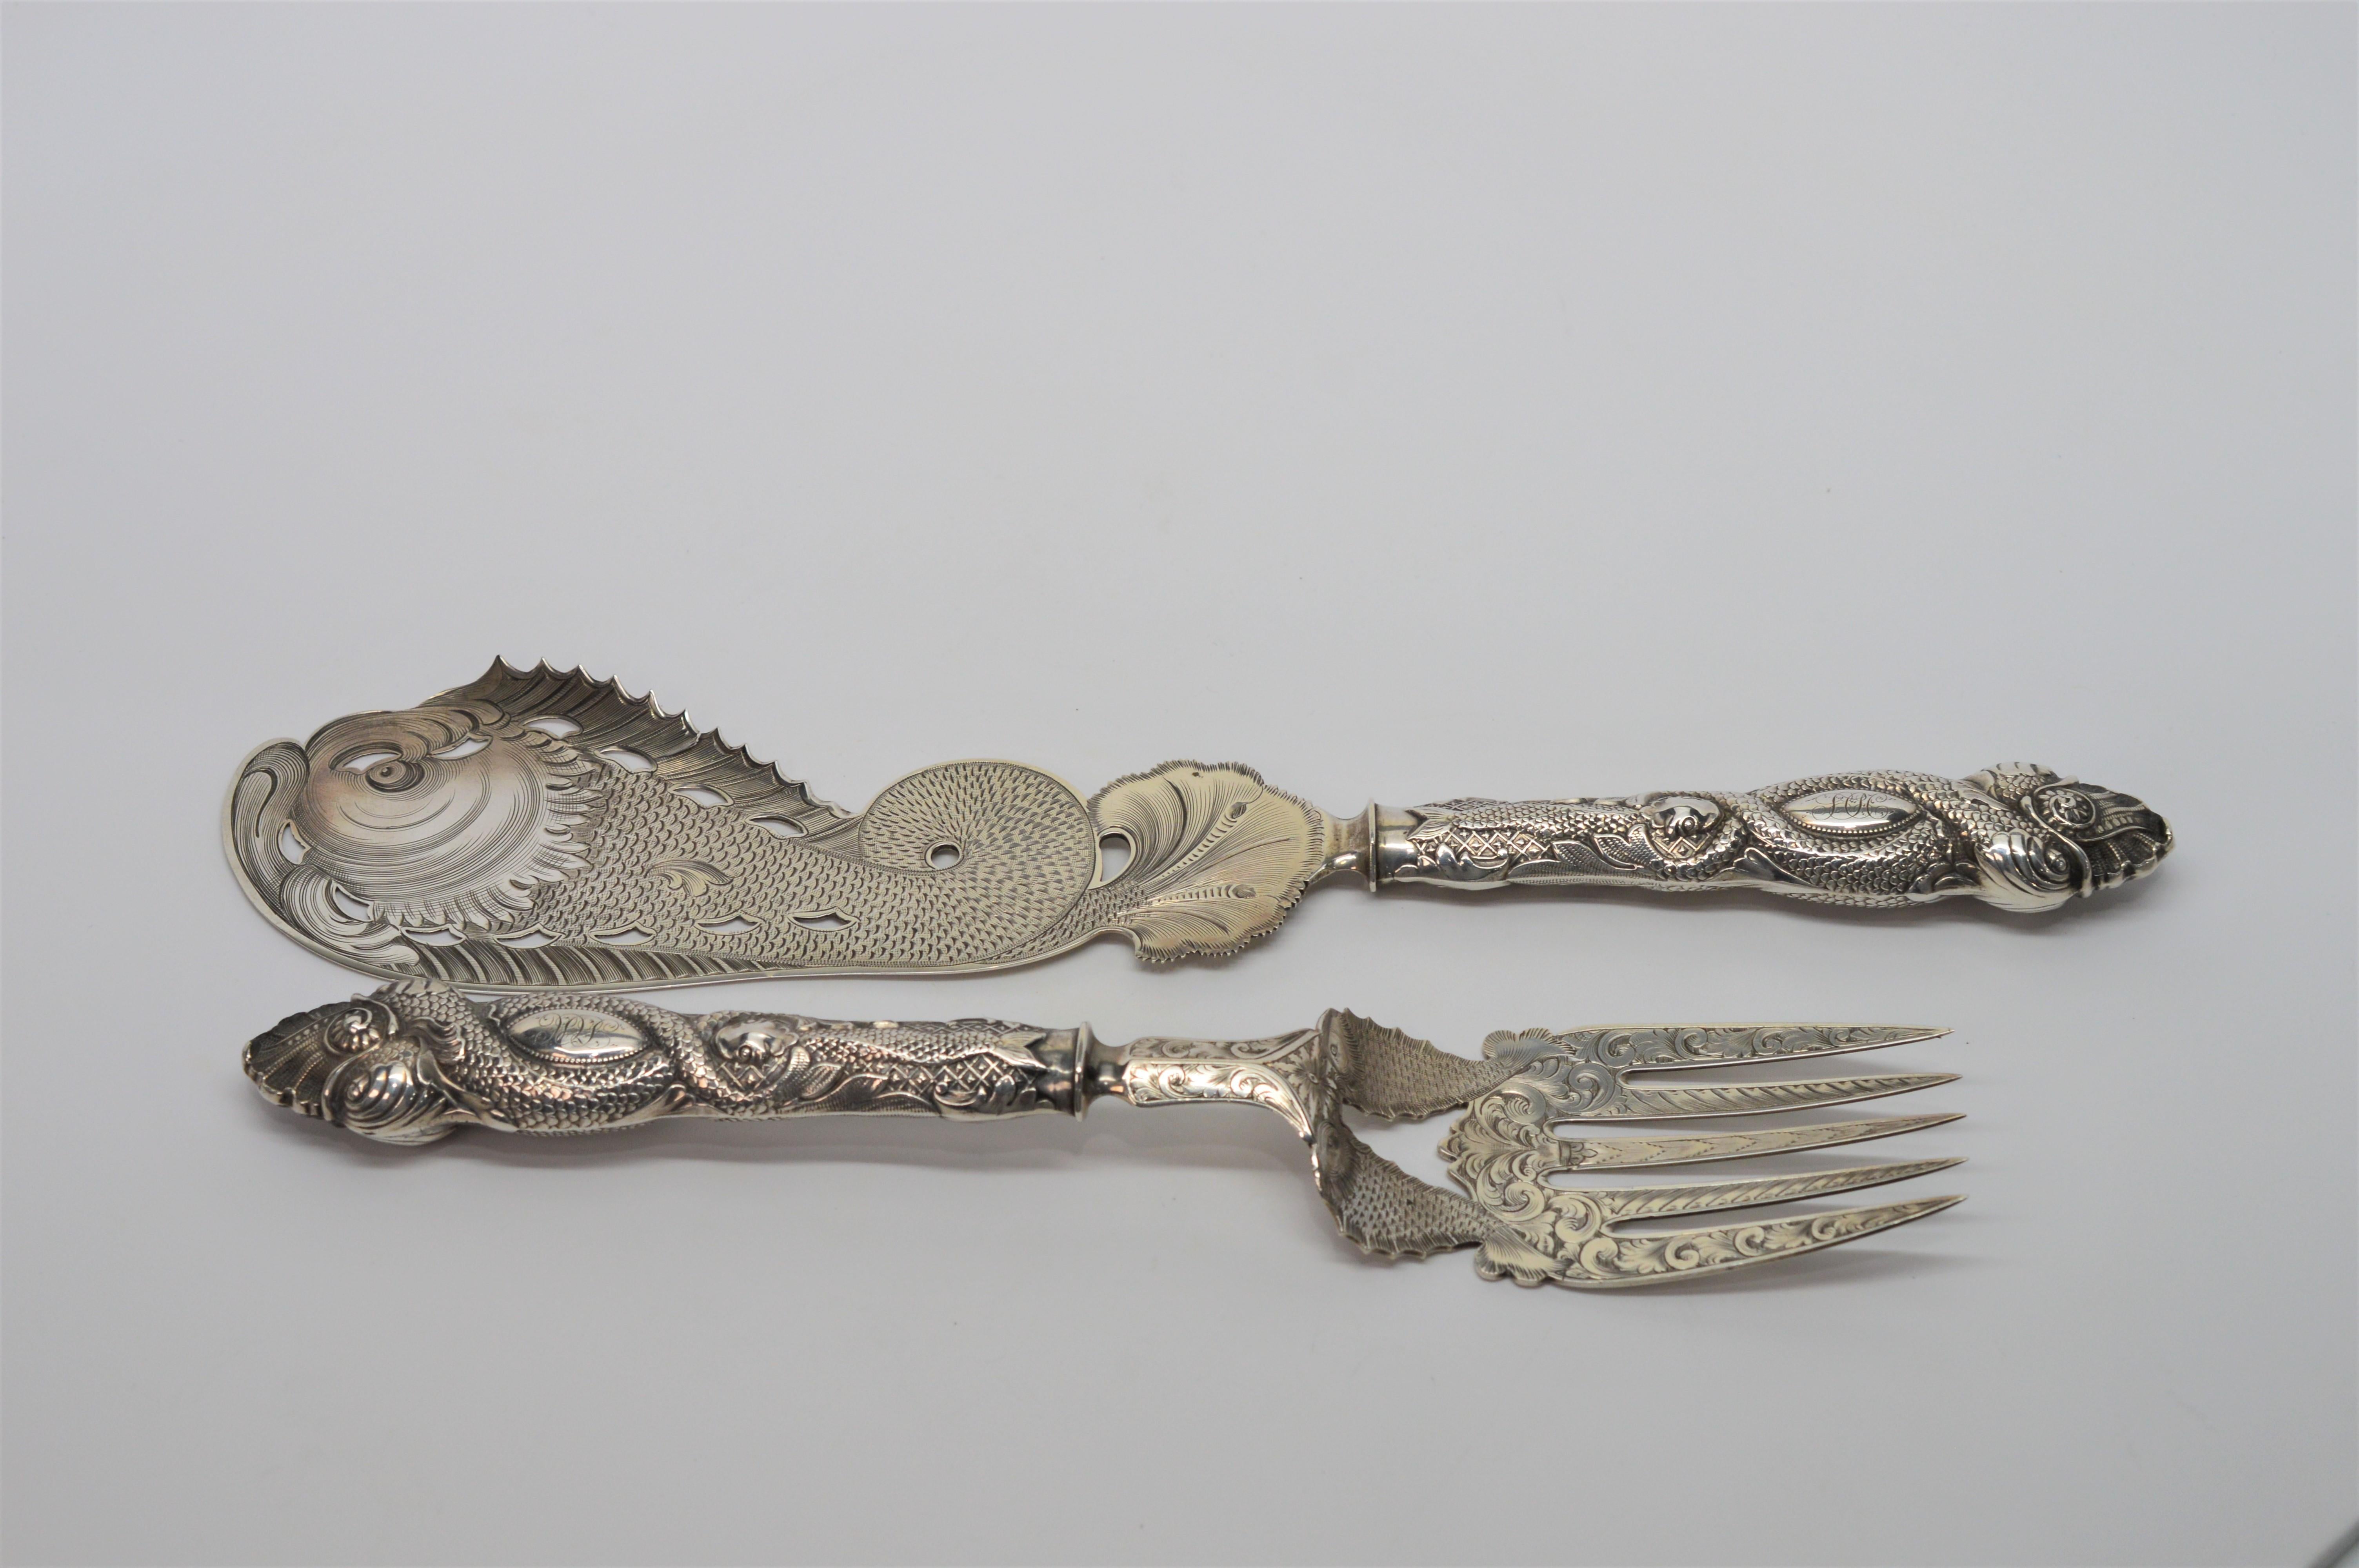 Circa 1853, by maker James S. Vancourt & Co., New York City, this ornately engraved .900 Silver Fish Knife and Fork is hallmarked and personalized.
In excellent condition.   